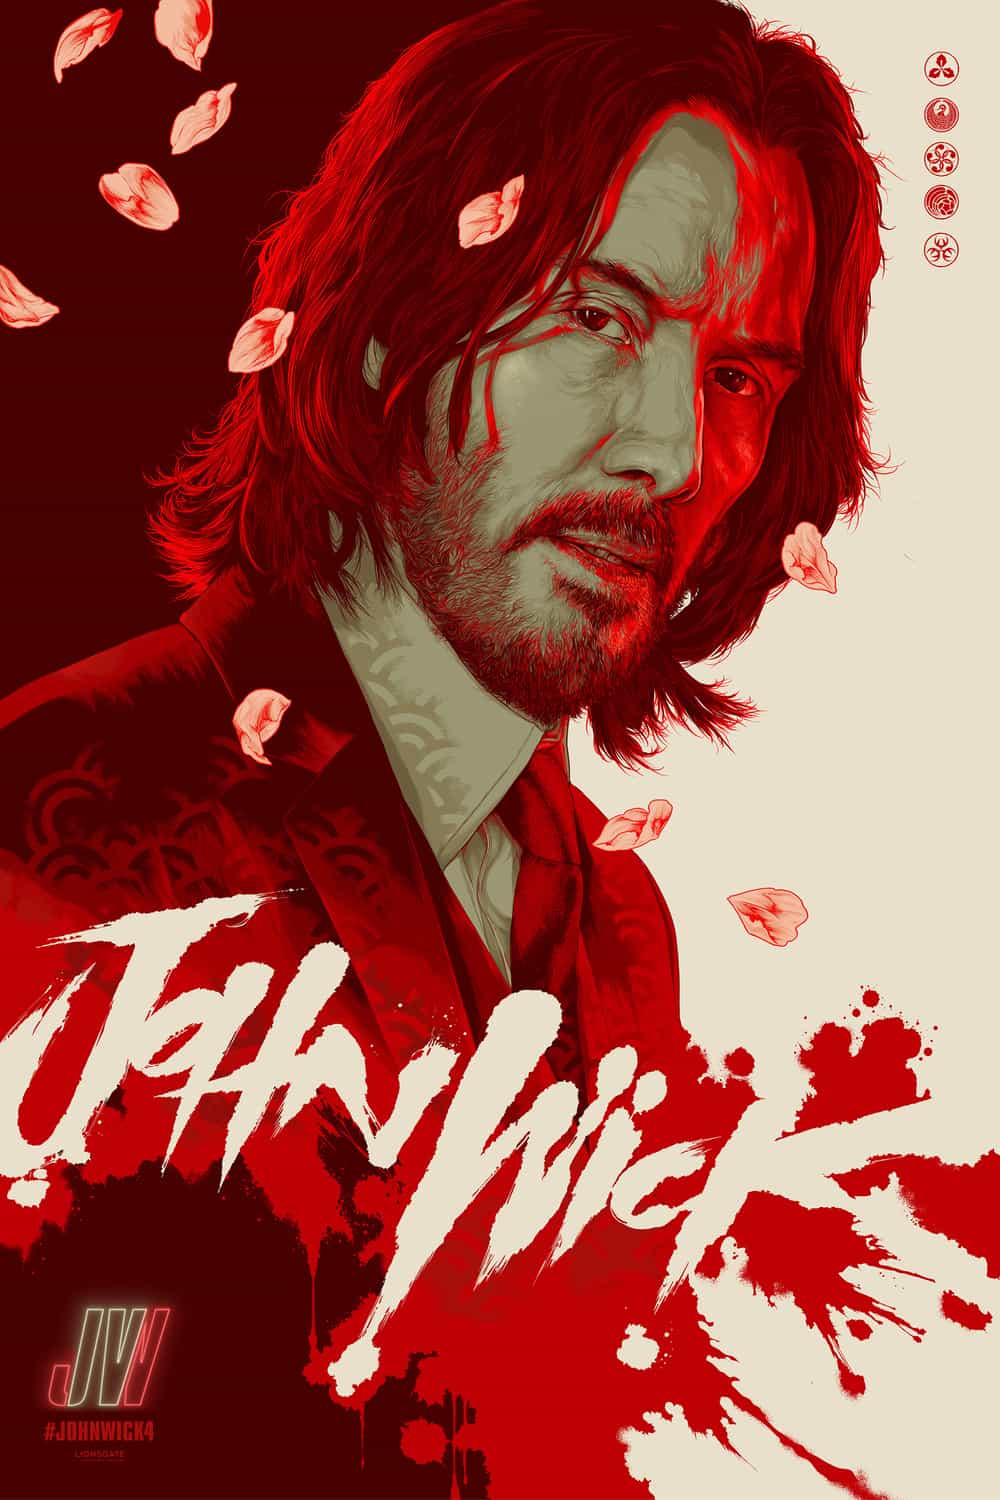 UK Box Office Weekend Report 24th - 26th March 2023:  John Wick 4 takes over the top spot on the UK box office with a debut gross of £5.3 Million